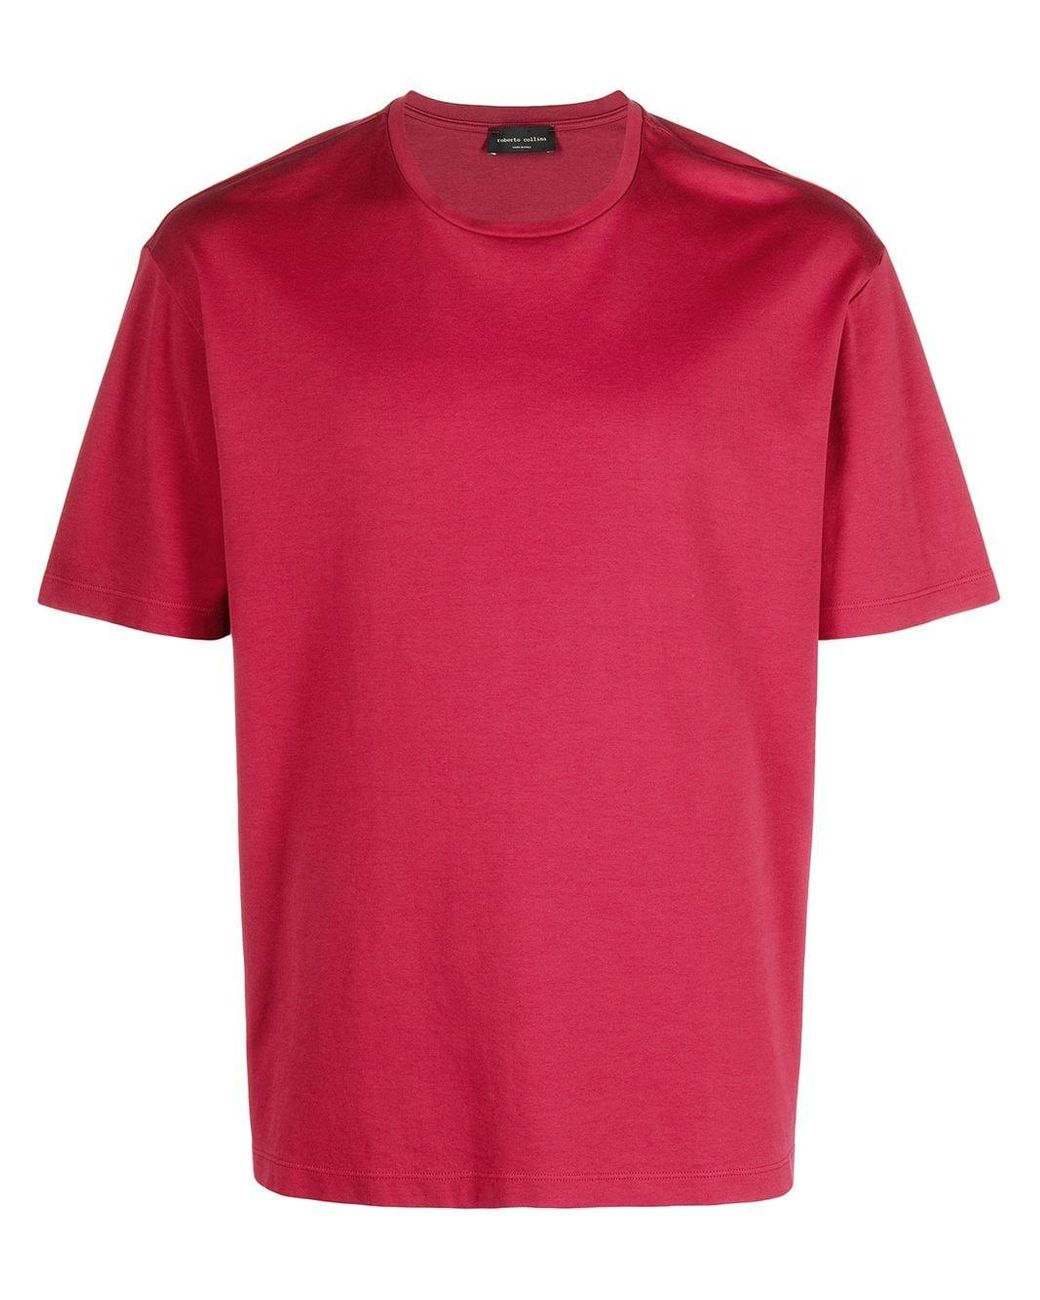 Roberto Collina Short-sleeved Cotton T-shirt in Red for Men - Lyst